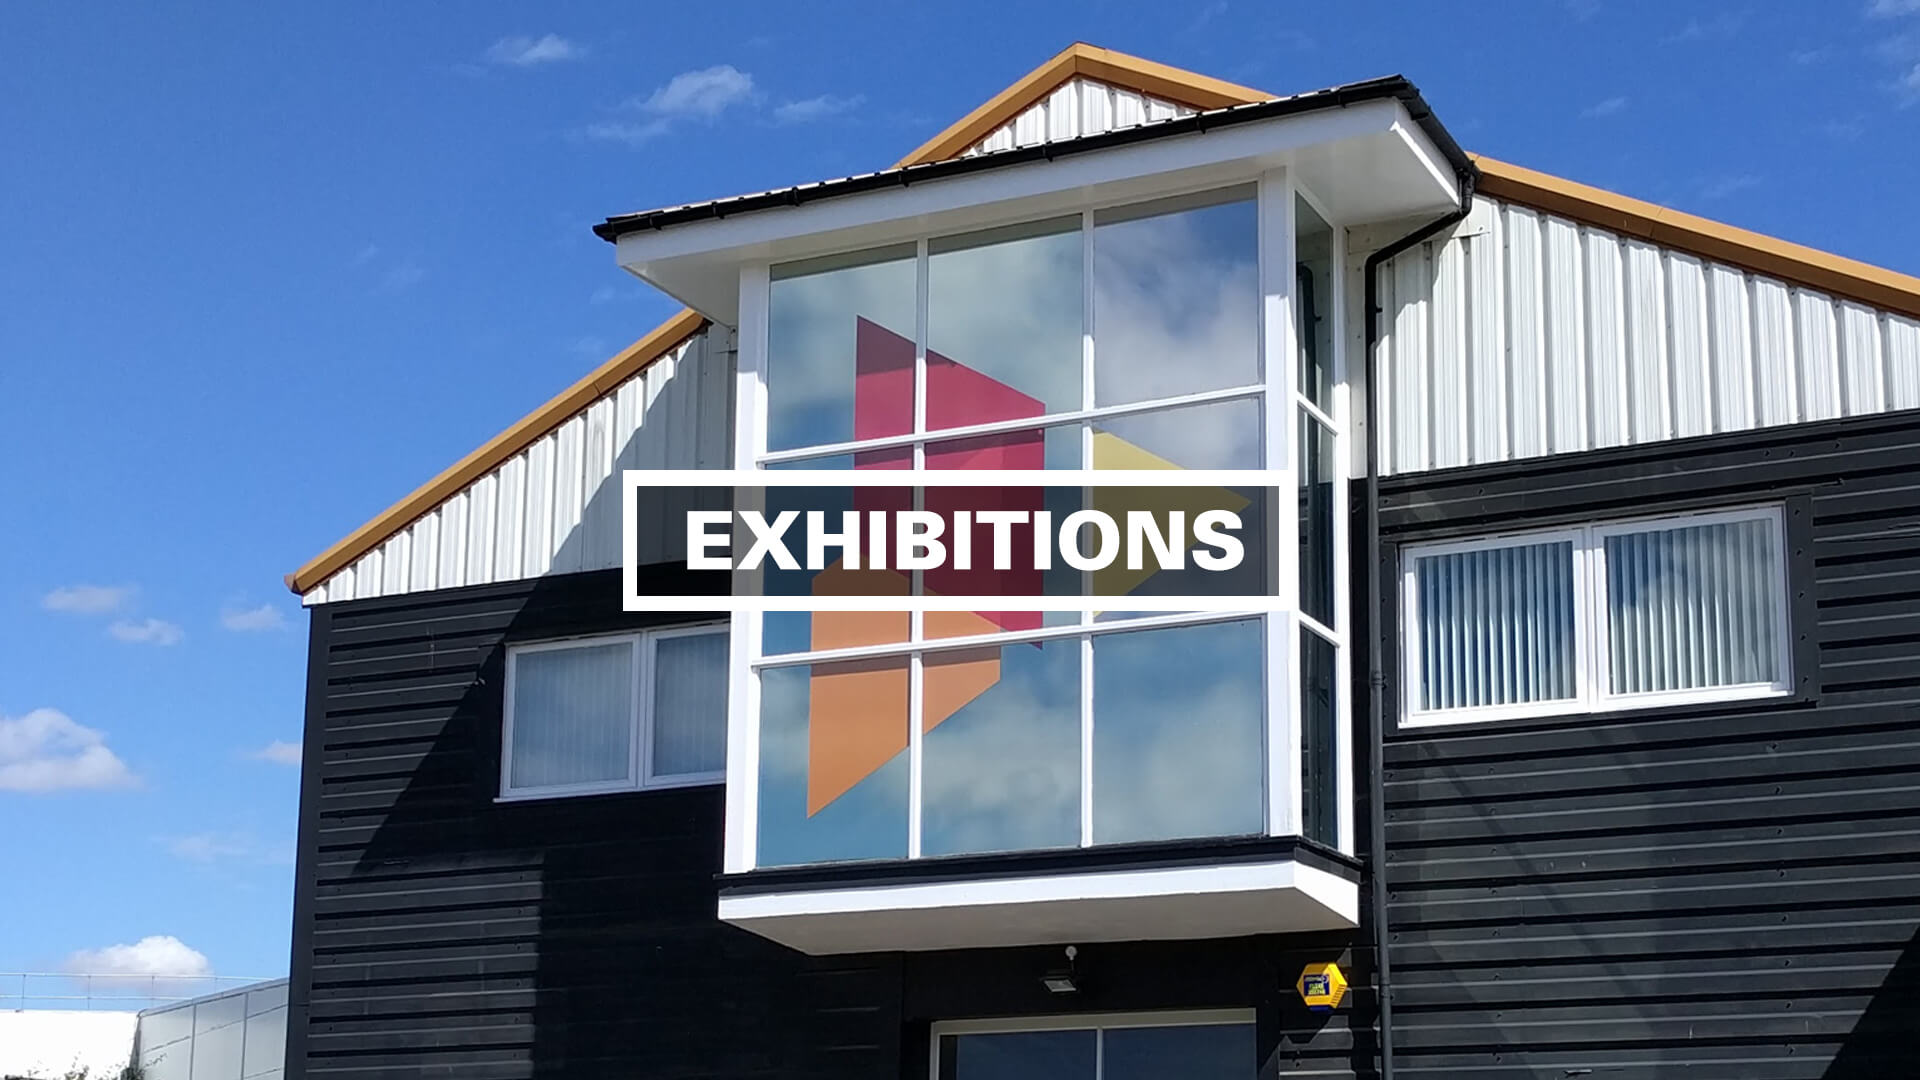 about exhibitions banner image